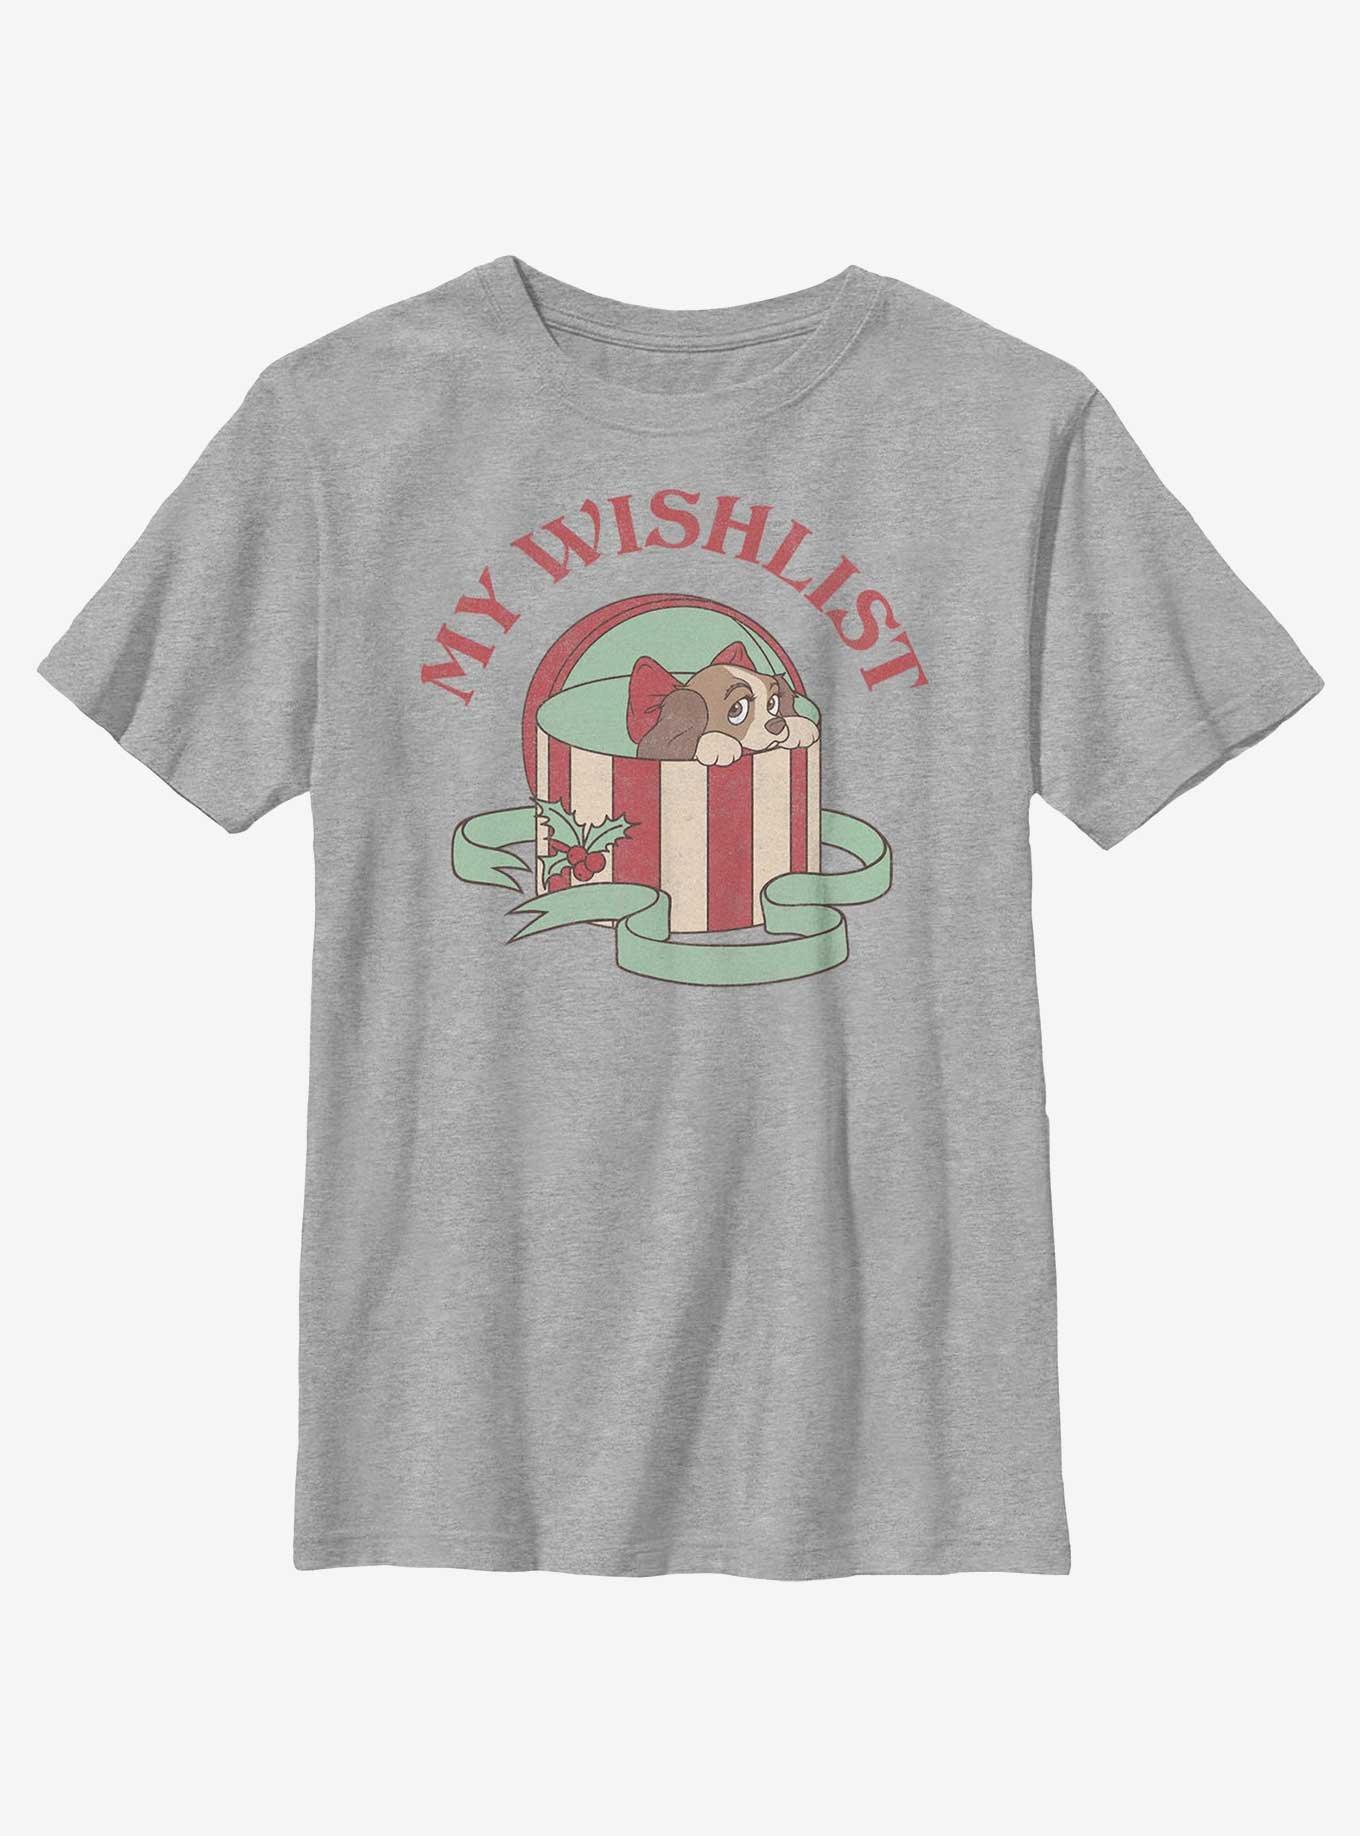 Disney Lady and the Tramp My Wishlist Youth T-Shirt, ATH HTR, hi-res